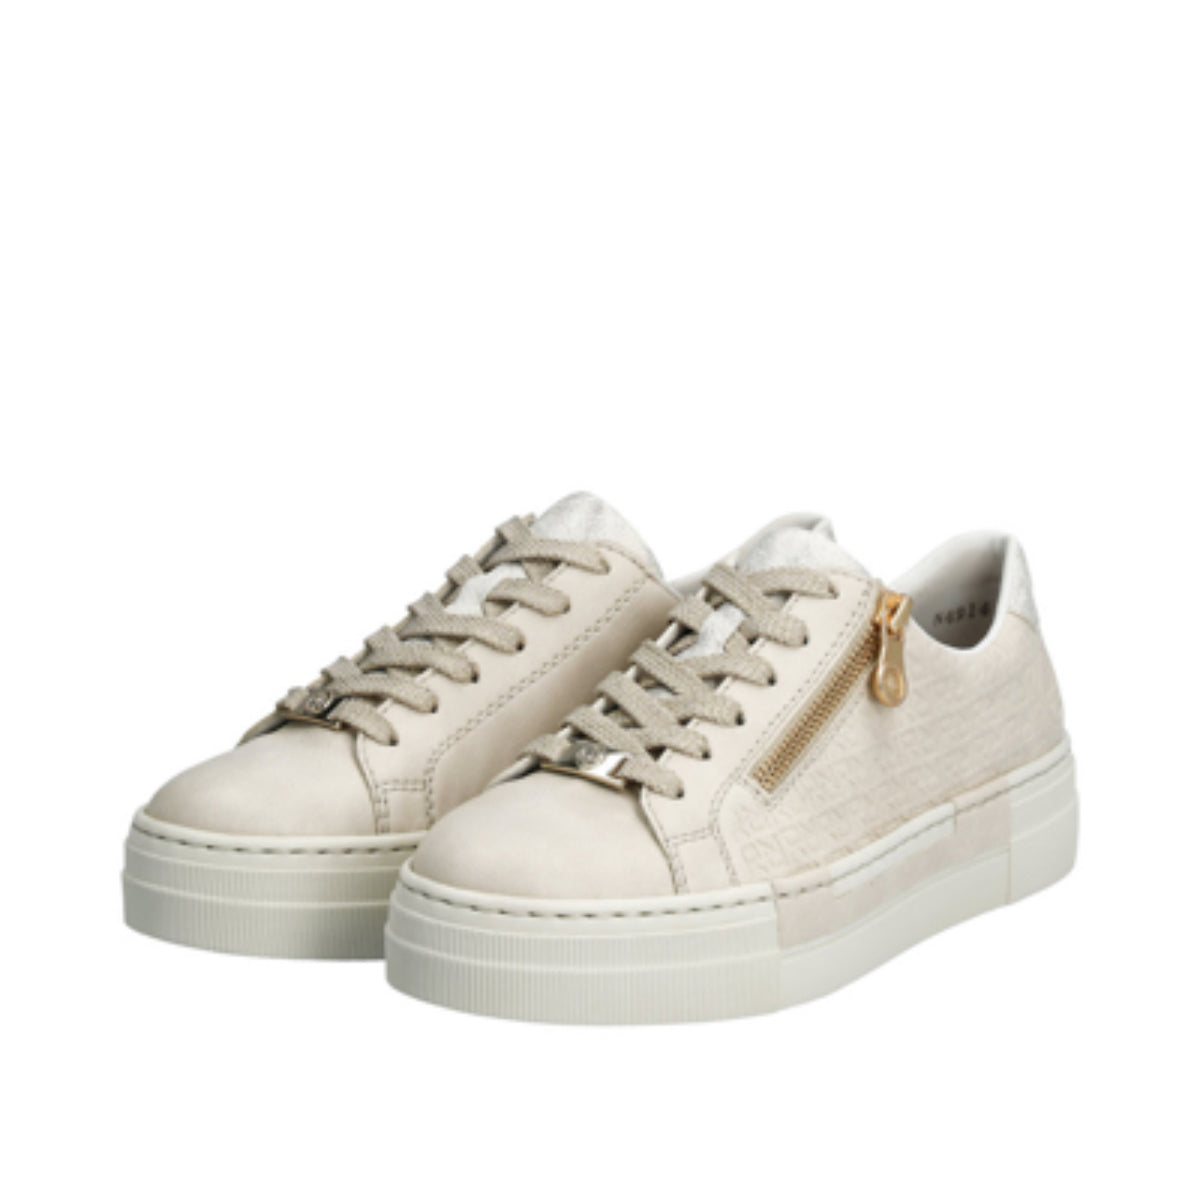 Rieker - N4914 Cream Trainer with a Gold Zip